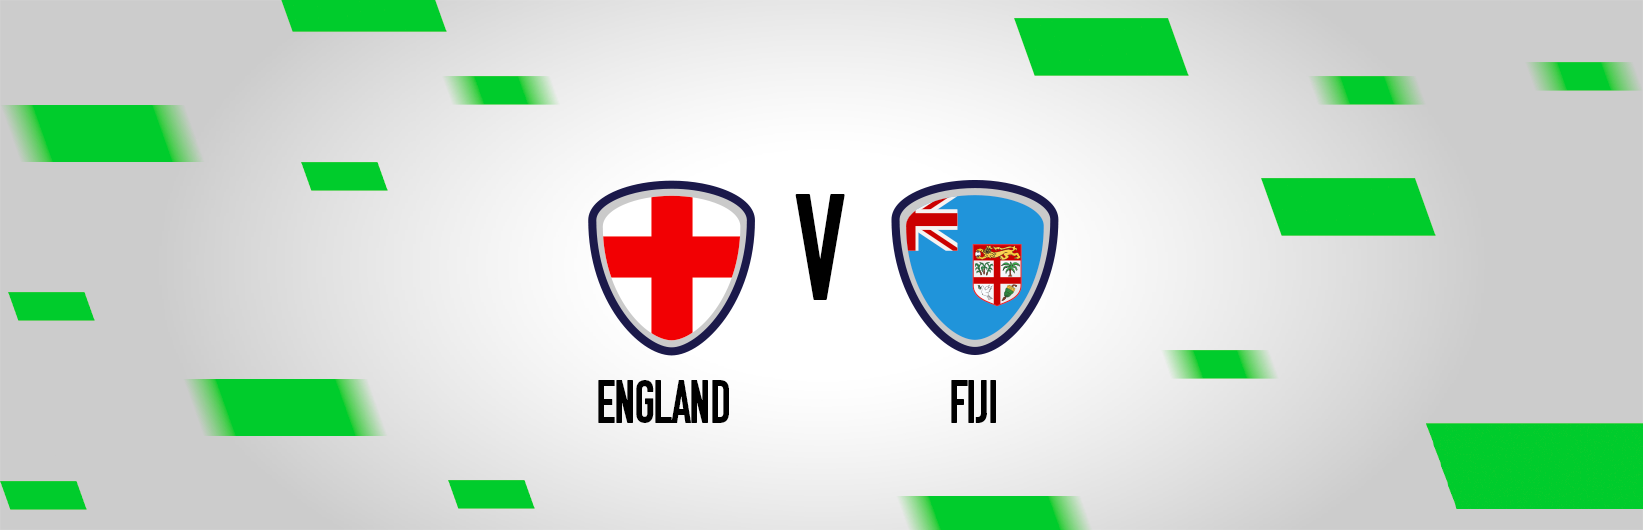 Rugby World Cup tips: Best bets for England v Fiji